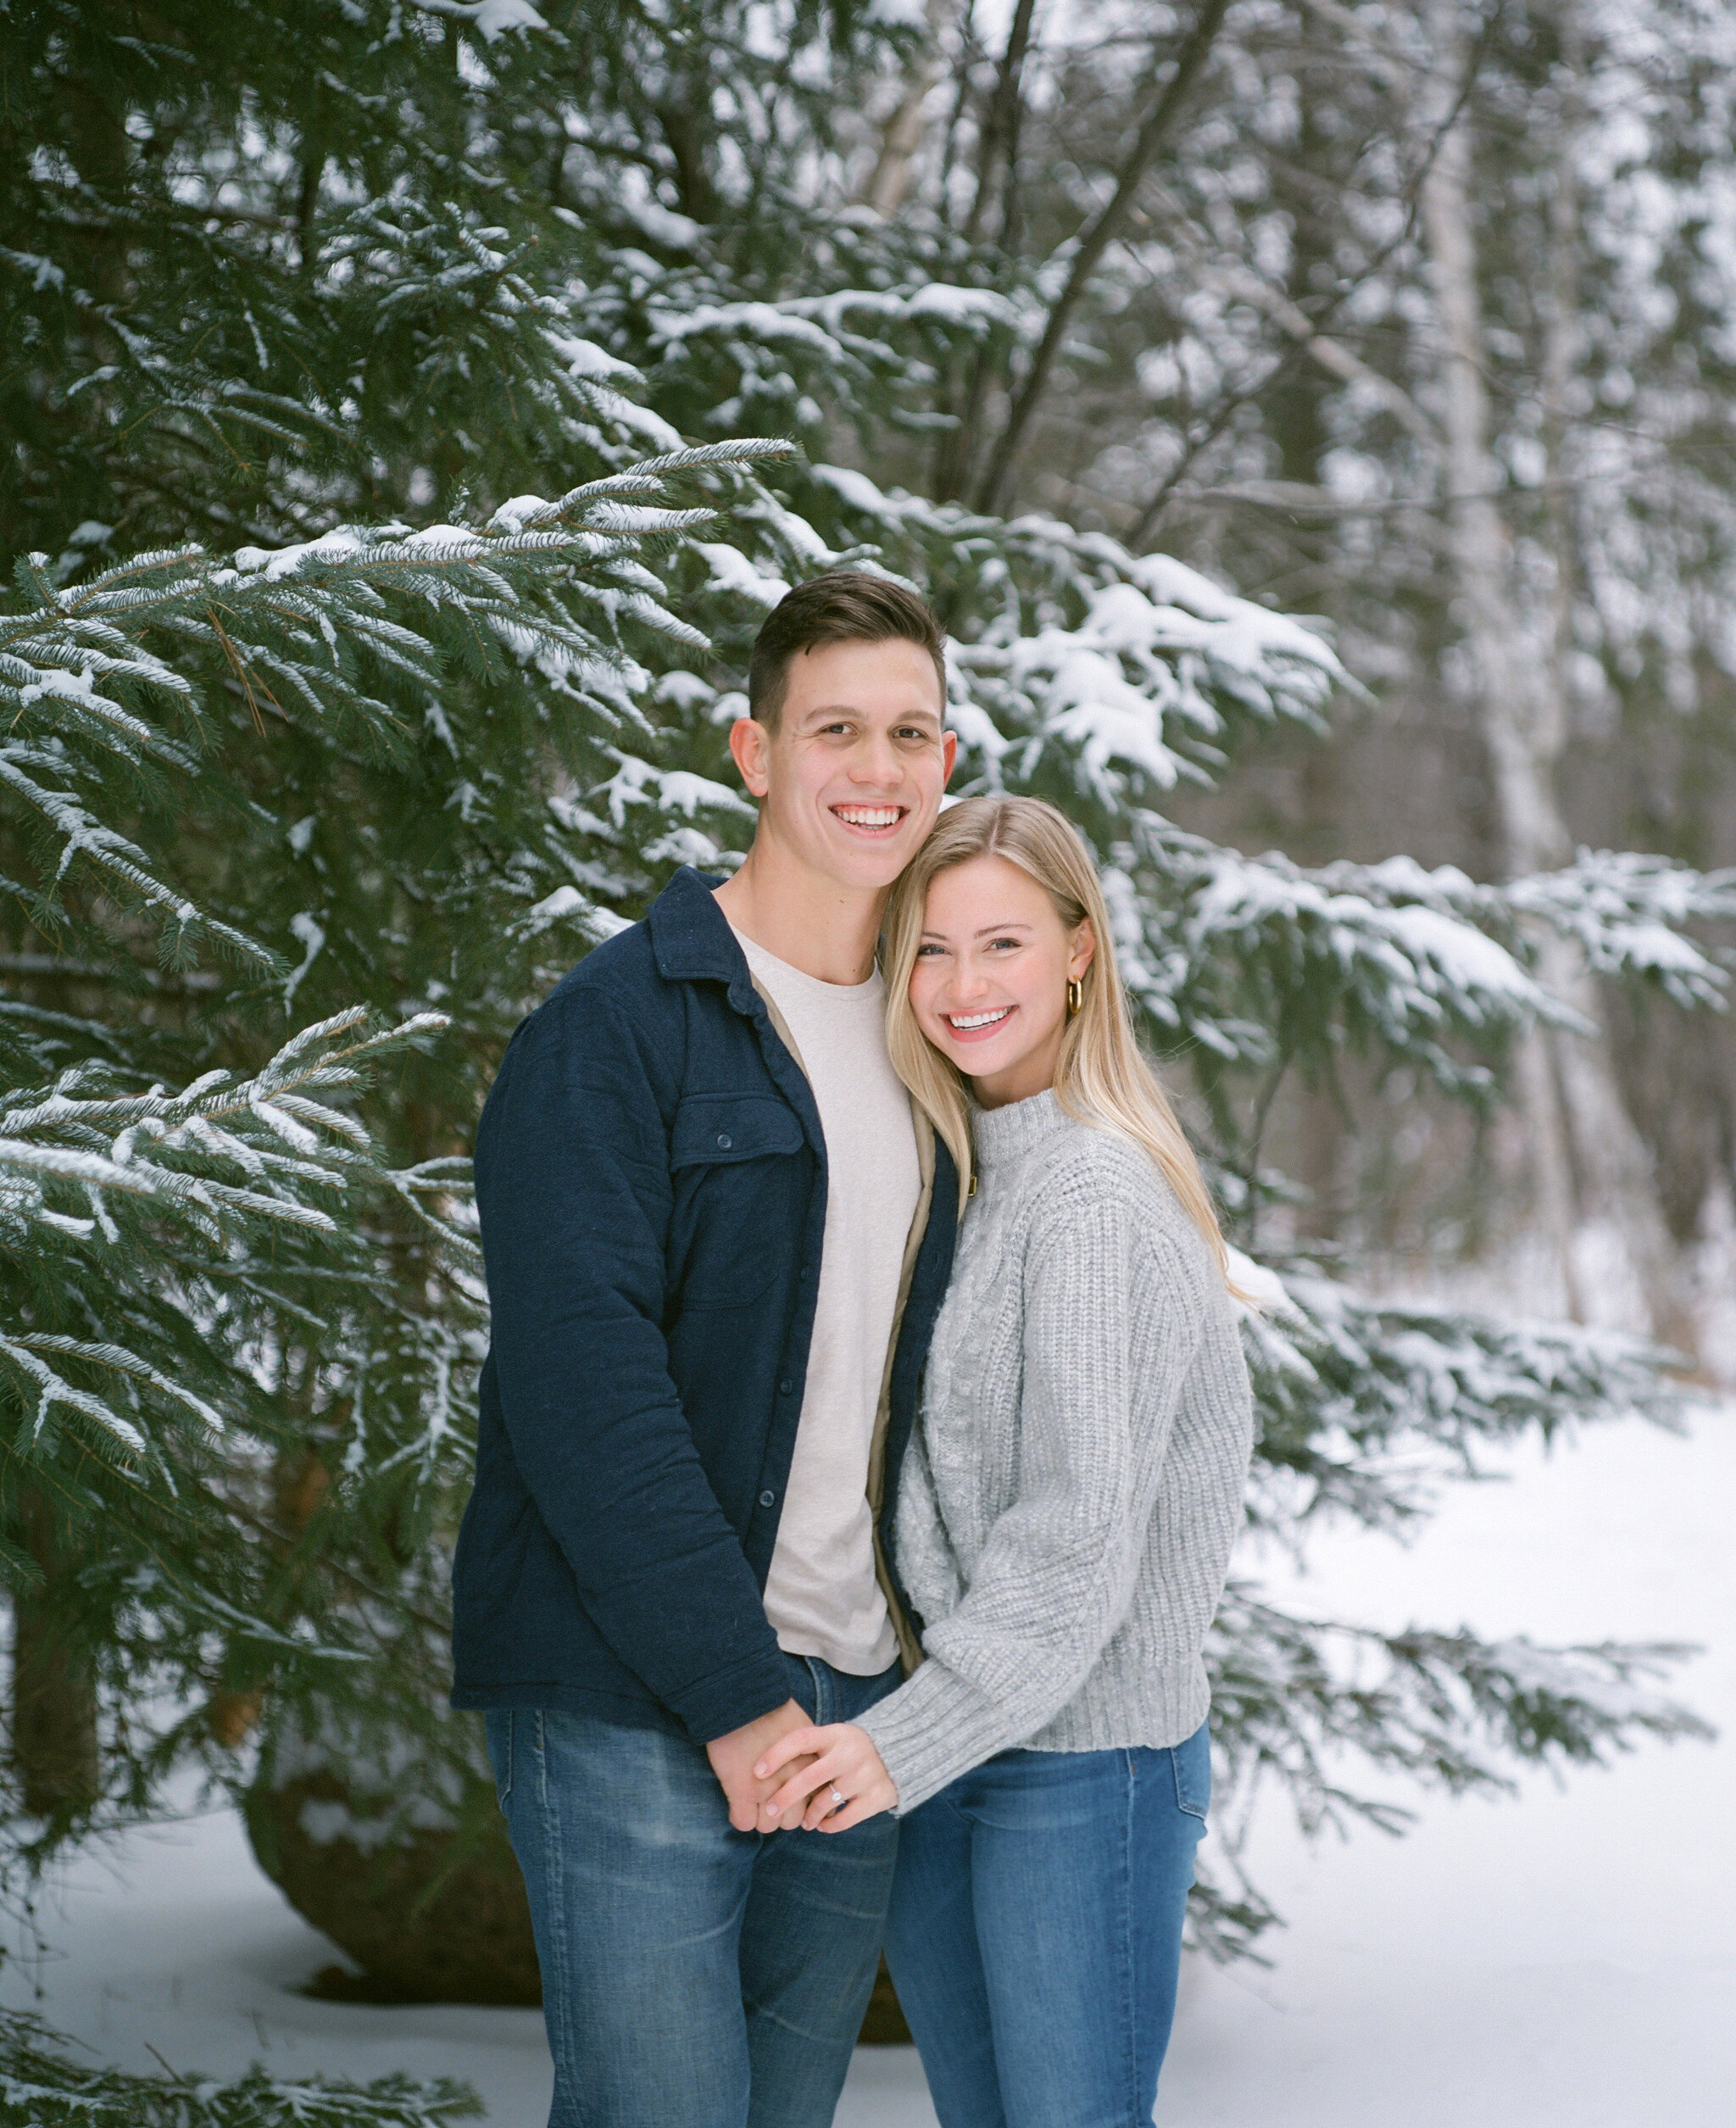 Winter-Engagement-Session-Wisconsin-006.JPG